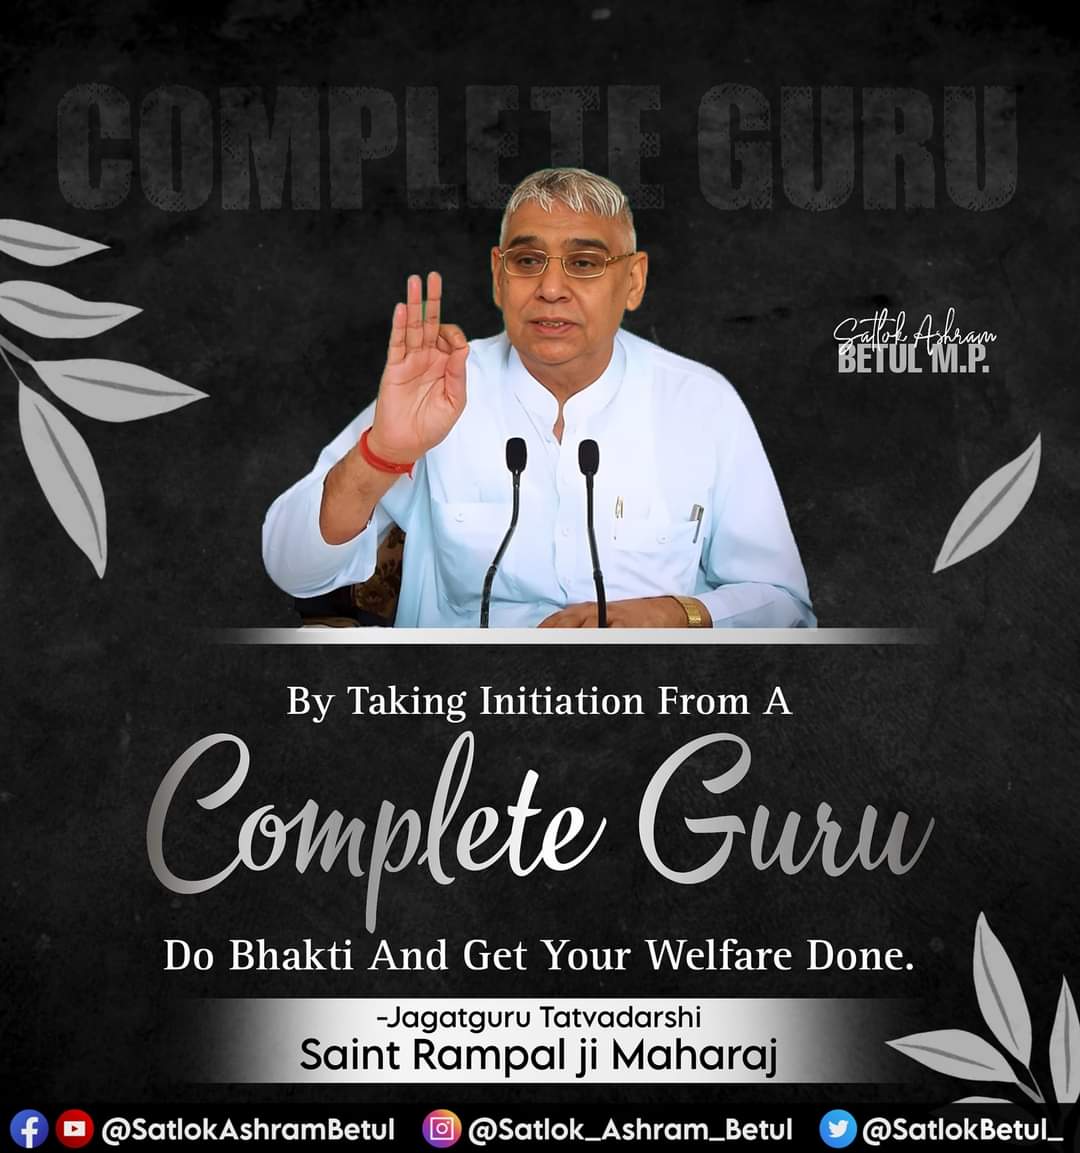 #Godmorningthurs
#SantRampaljiQoutes
By Taking Initiation From A Complete Guru Do Bhakti And Get Your Welfare Done.#सत_भक्ति_संदेश़
।